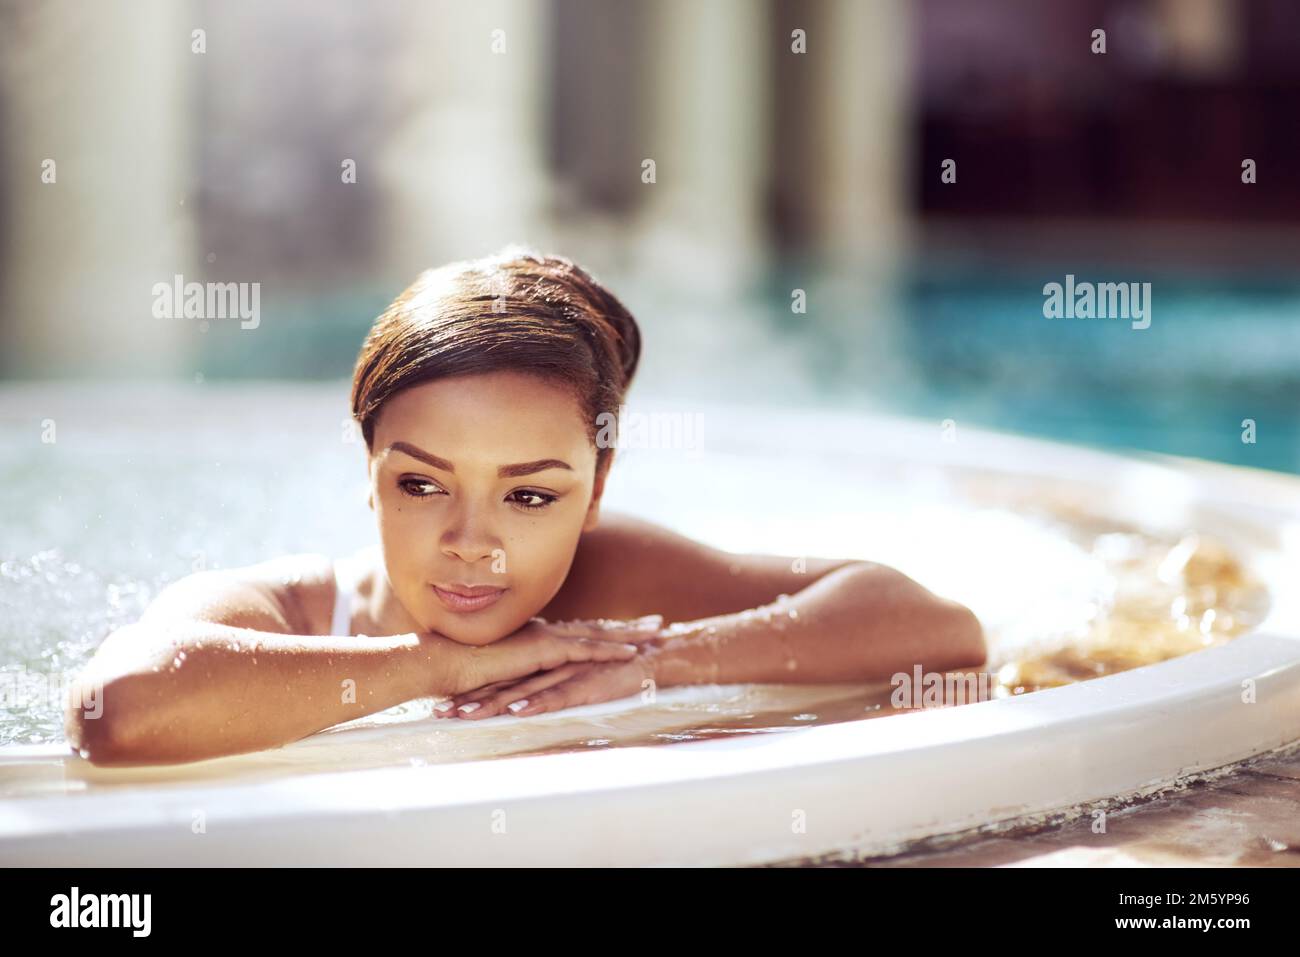 Taking advantage of the soothing benefits of steam. an attractive young woman relaxing in an indoor jacuzzi at a beauty spa. Stock Photo